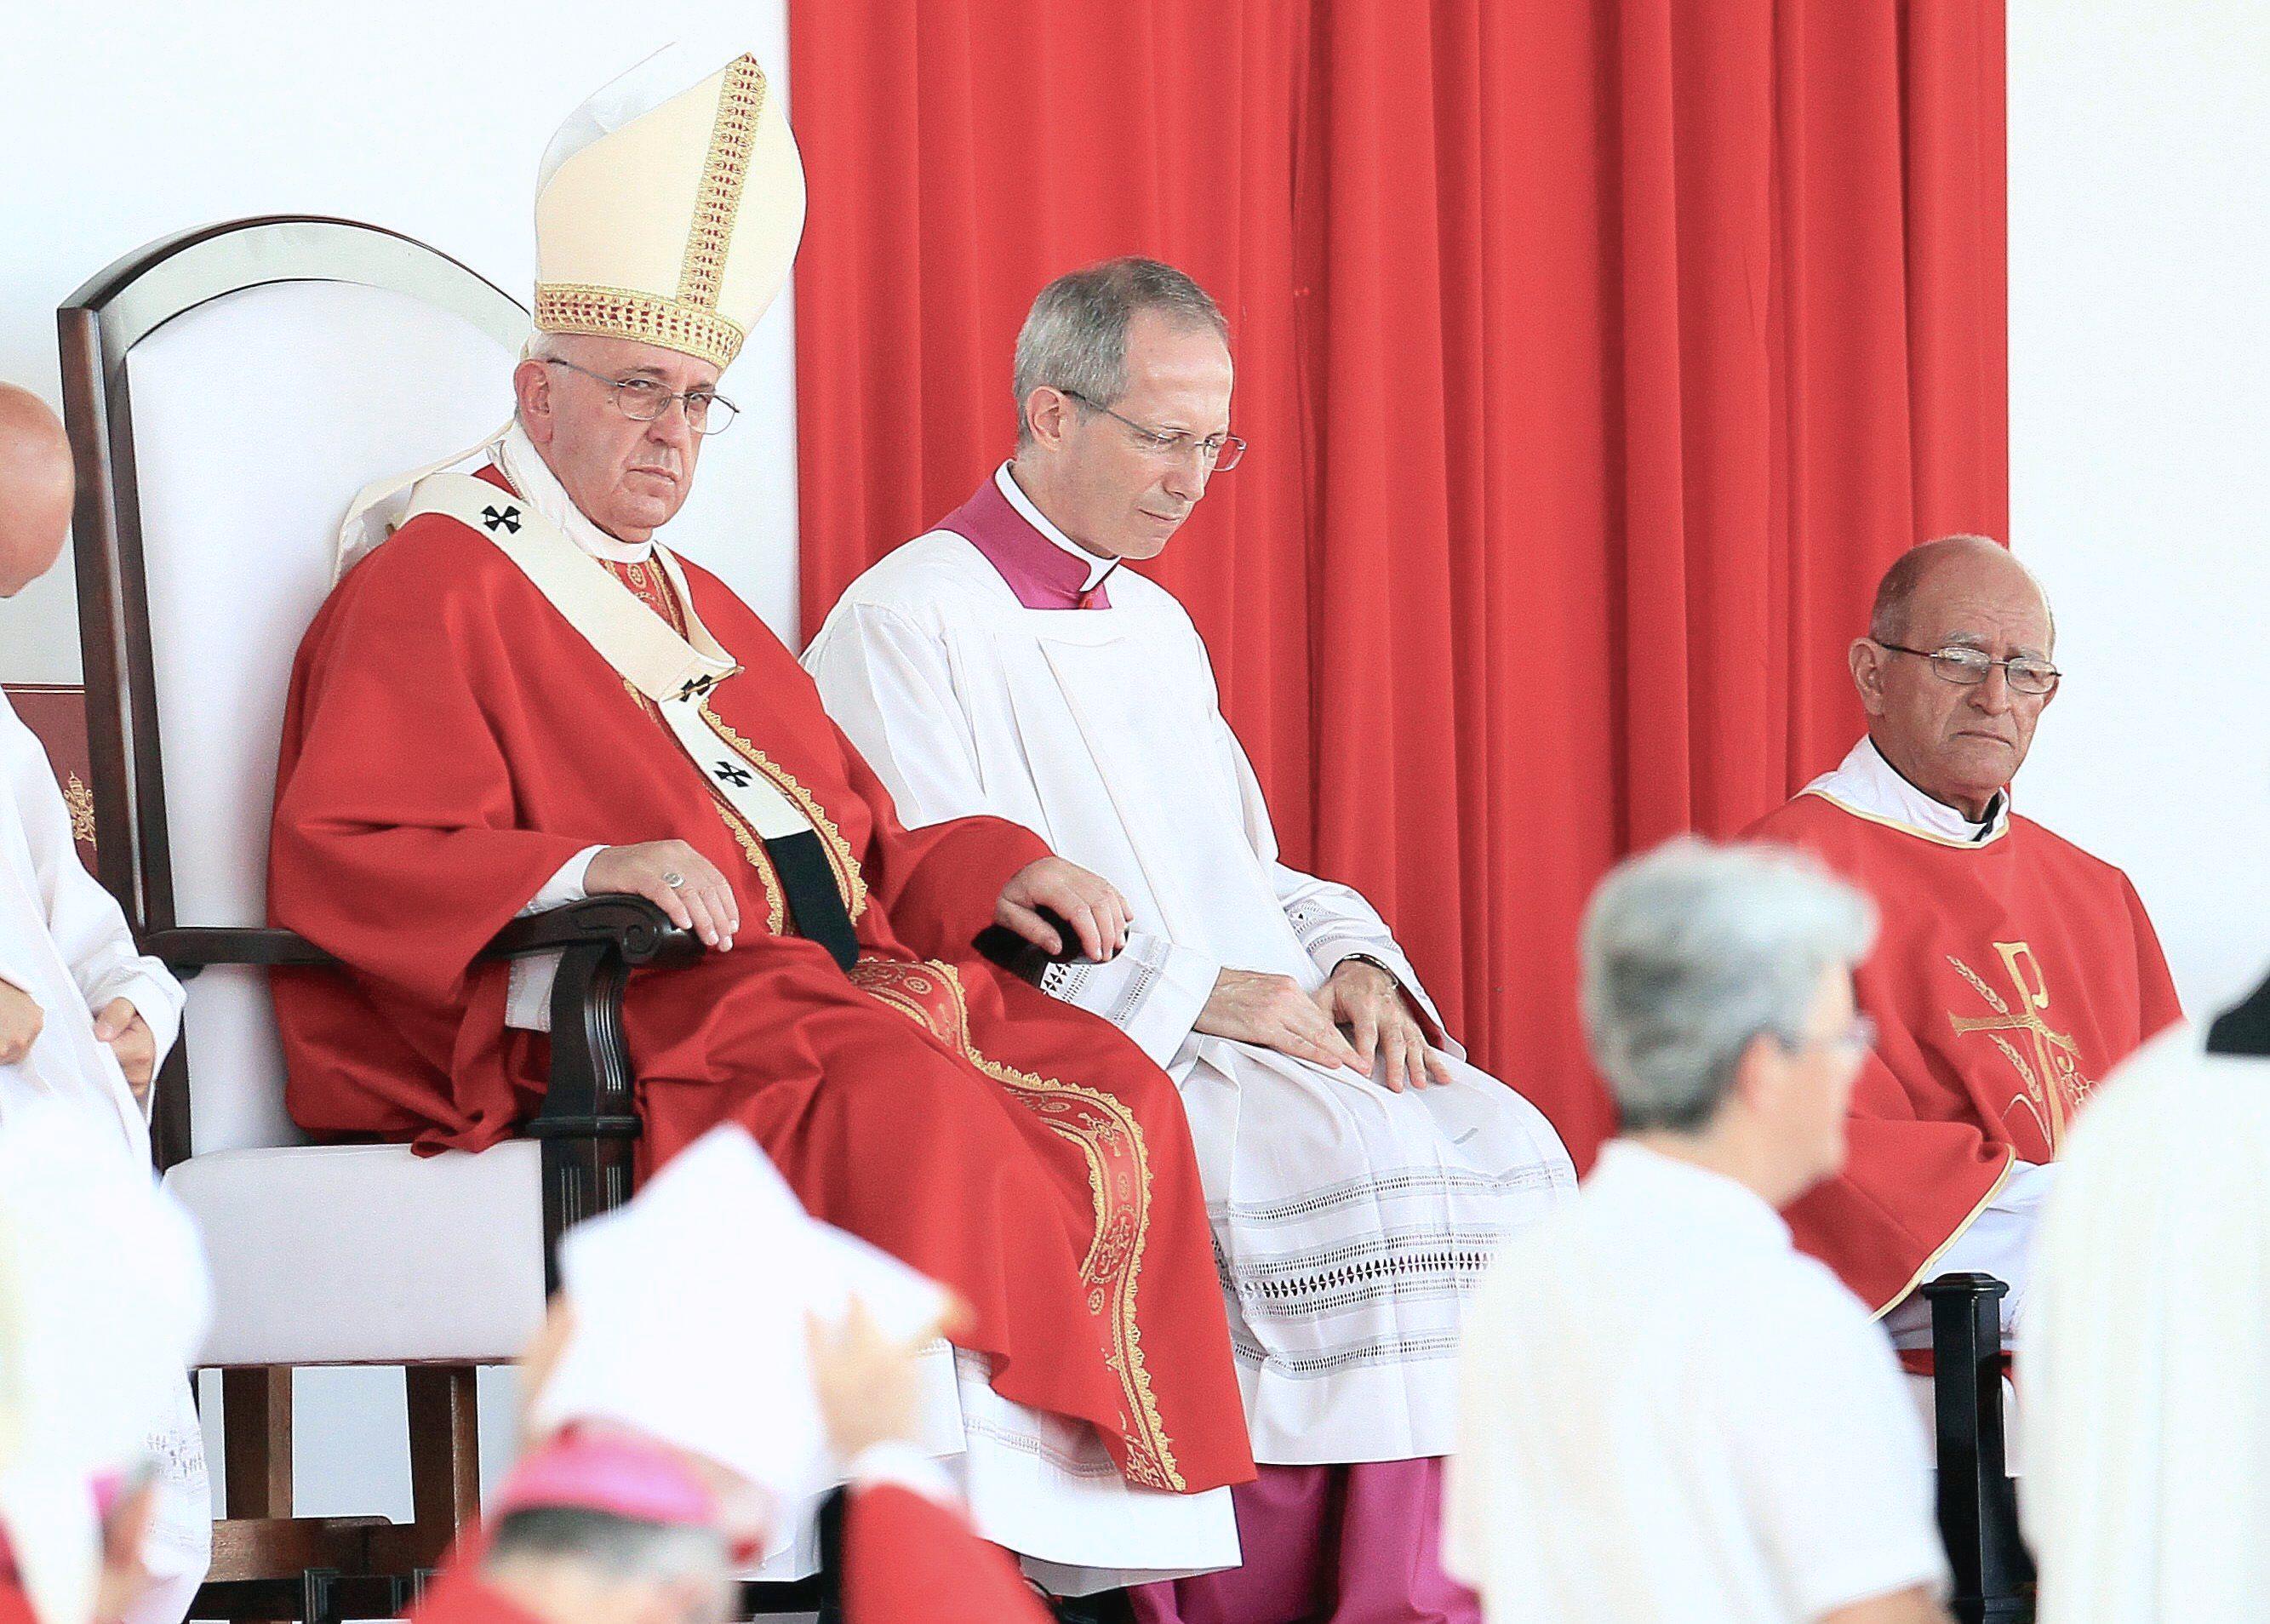 Pope Francis (L) looks on during a mass at Revolution Square in the city of Holguin